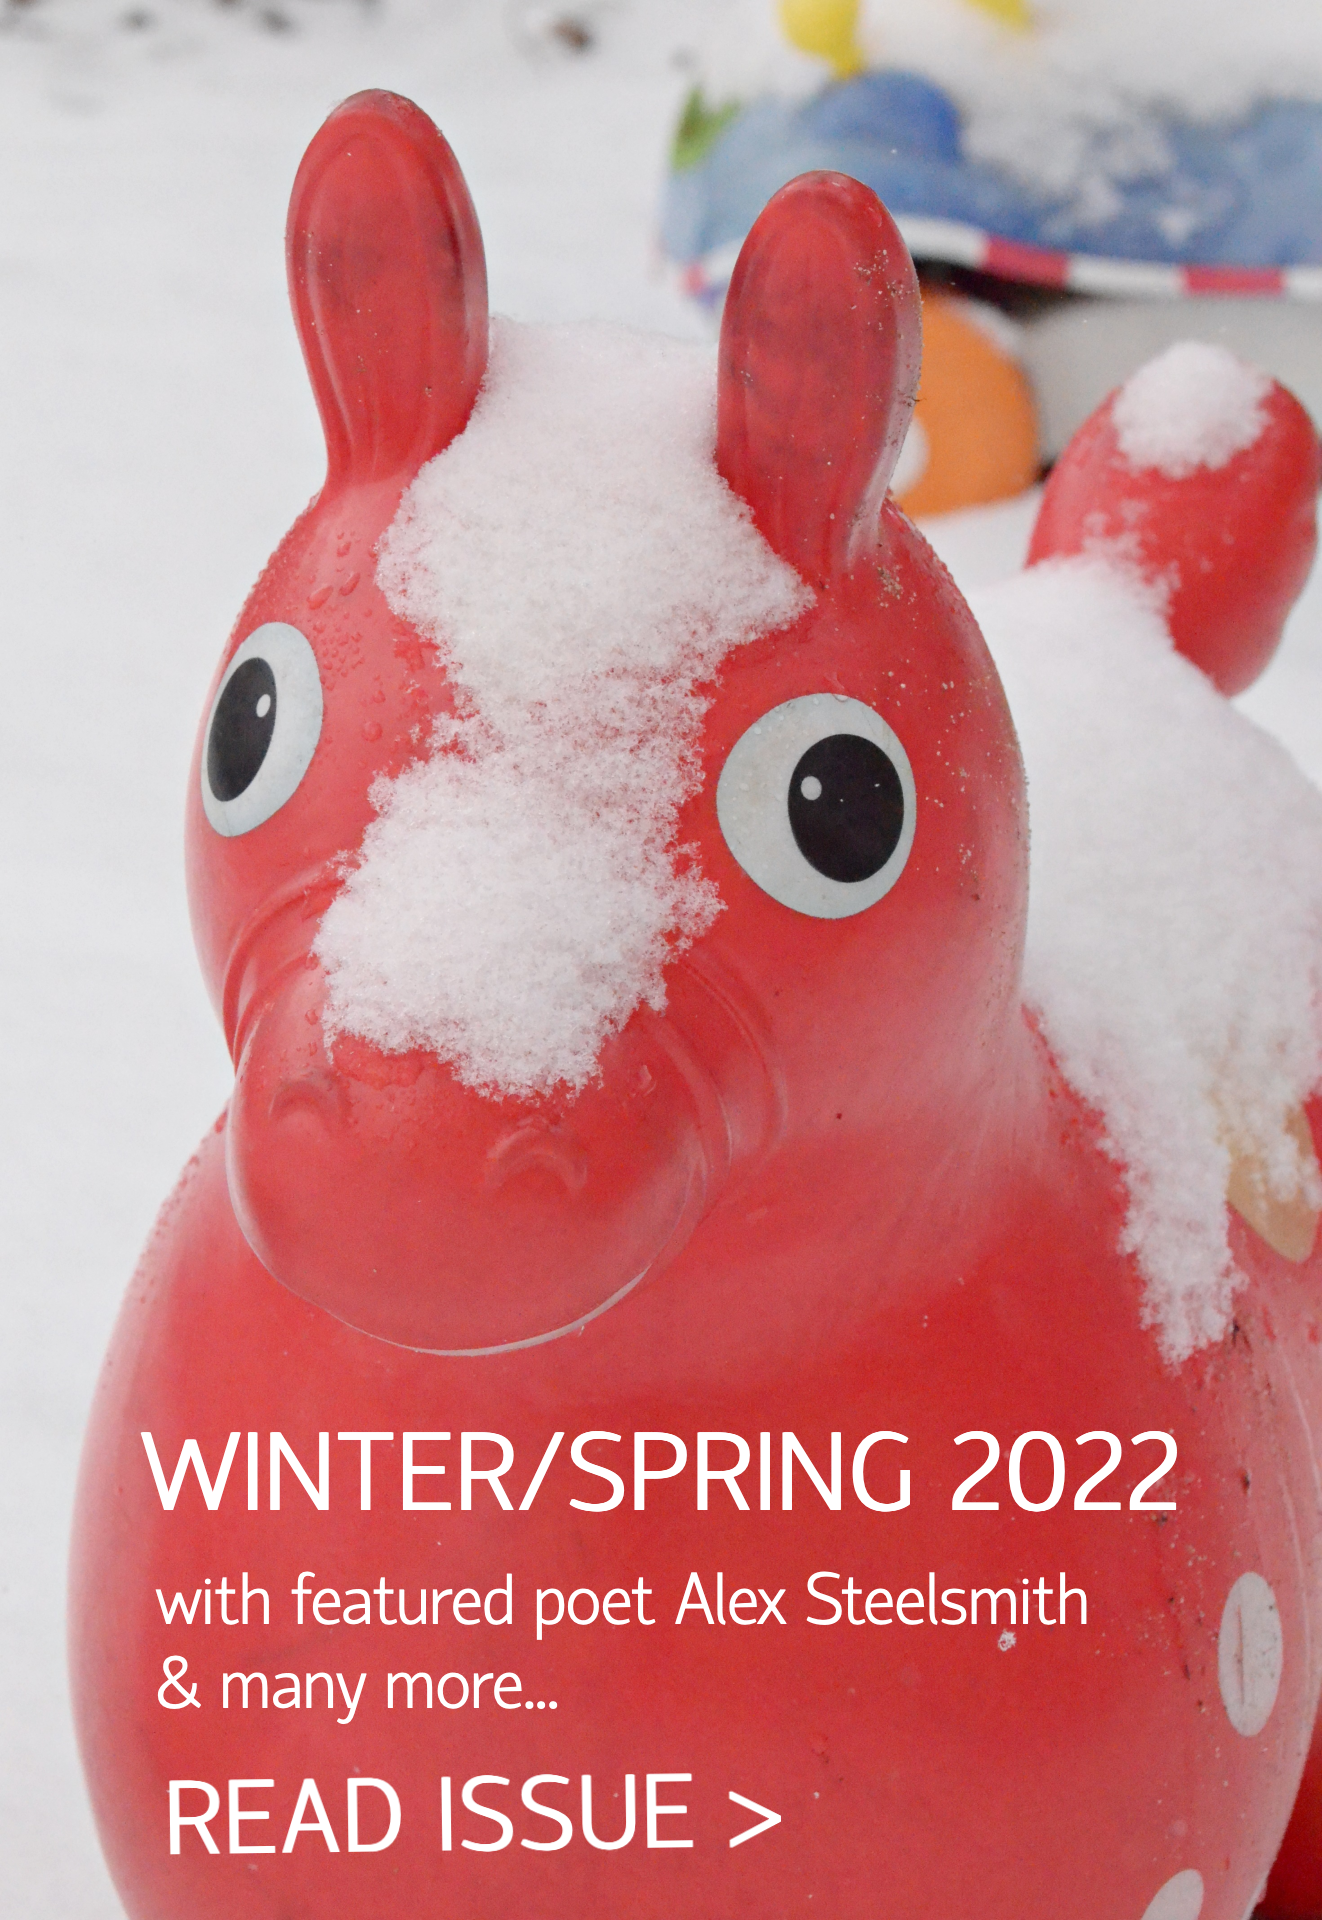 Winter/Spring 2022 with featured poet Alex Steelsmith